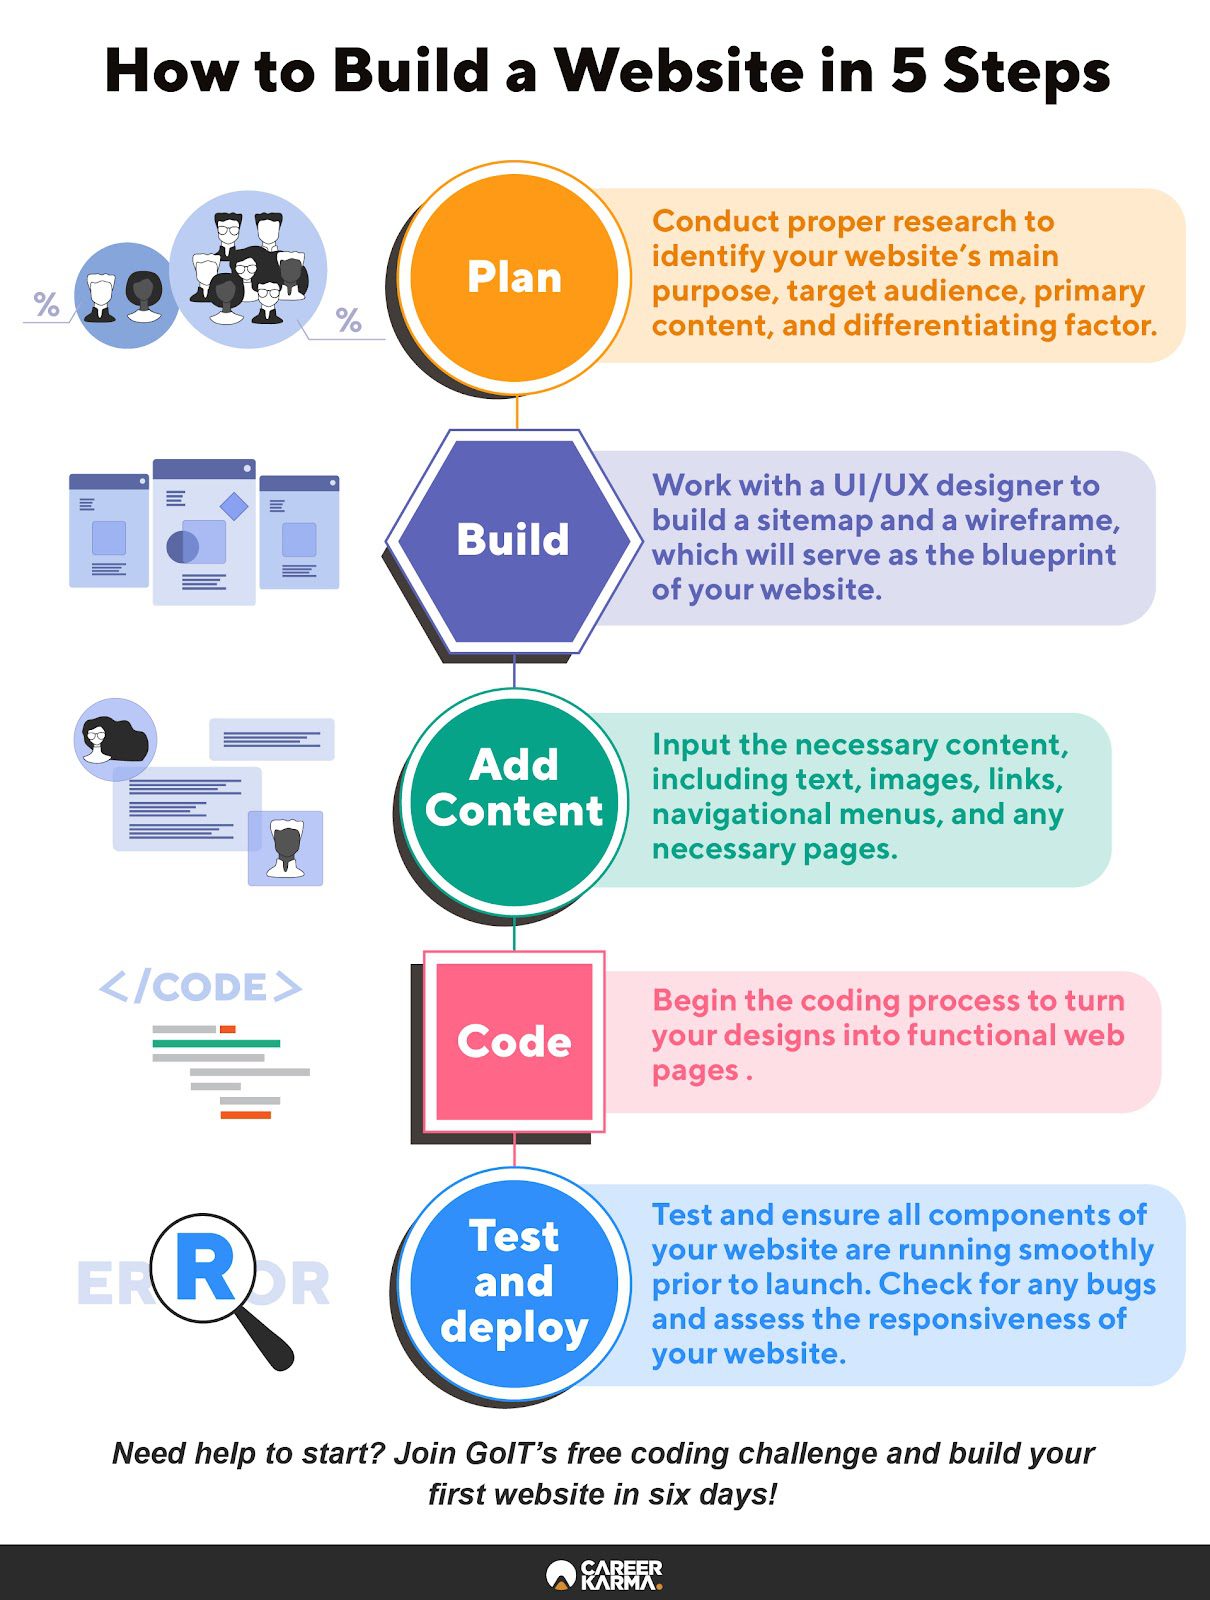 An infographic listing five steps to build a website from scratch